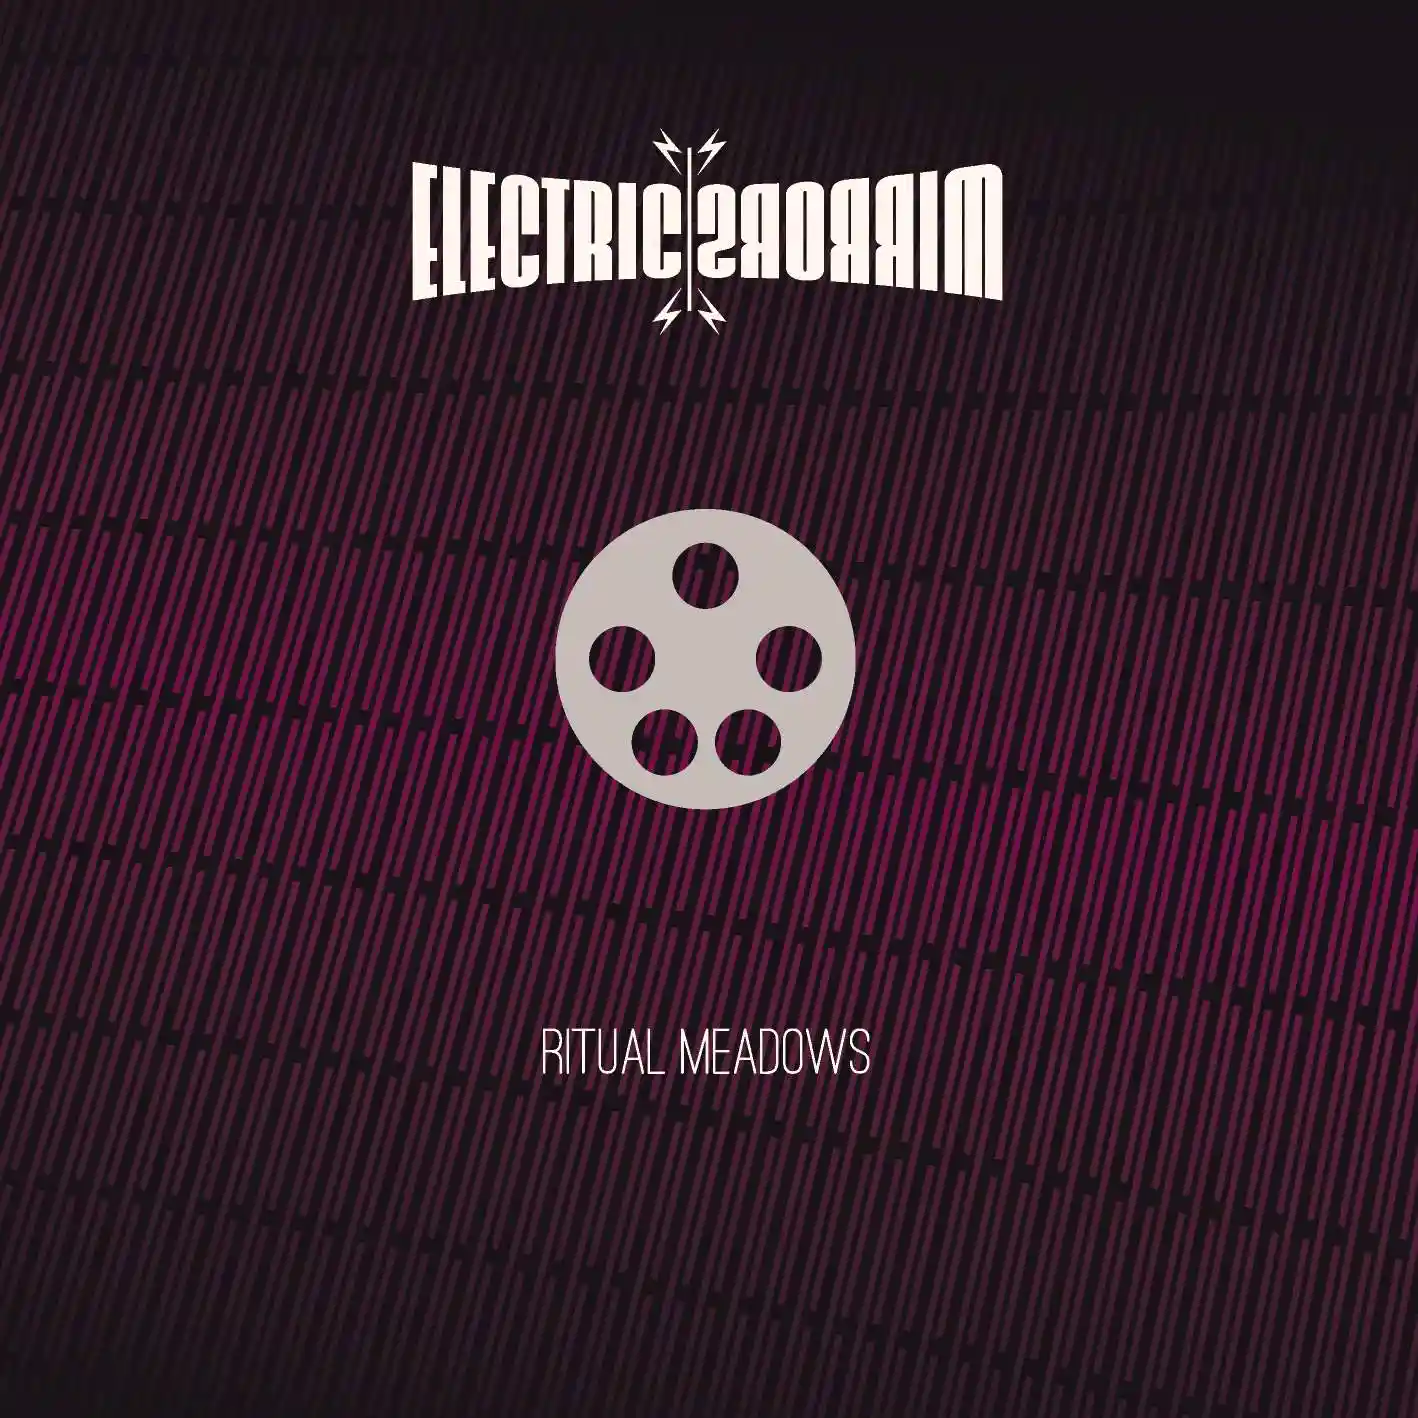 Album cover for “Ritual Meadows” by Electric Mirrors